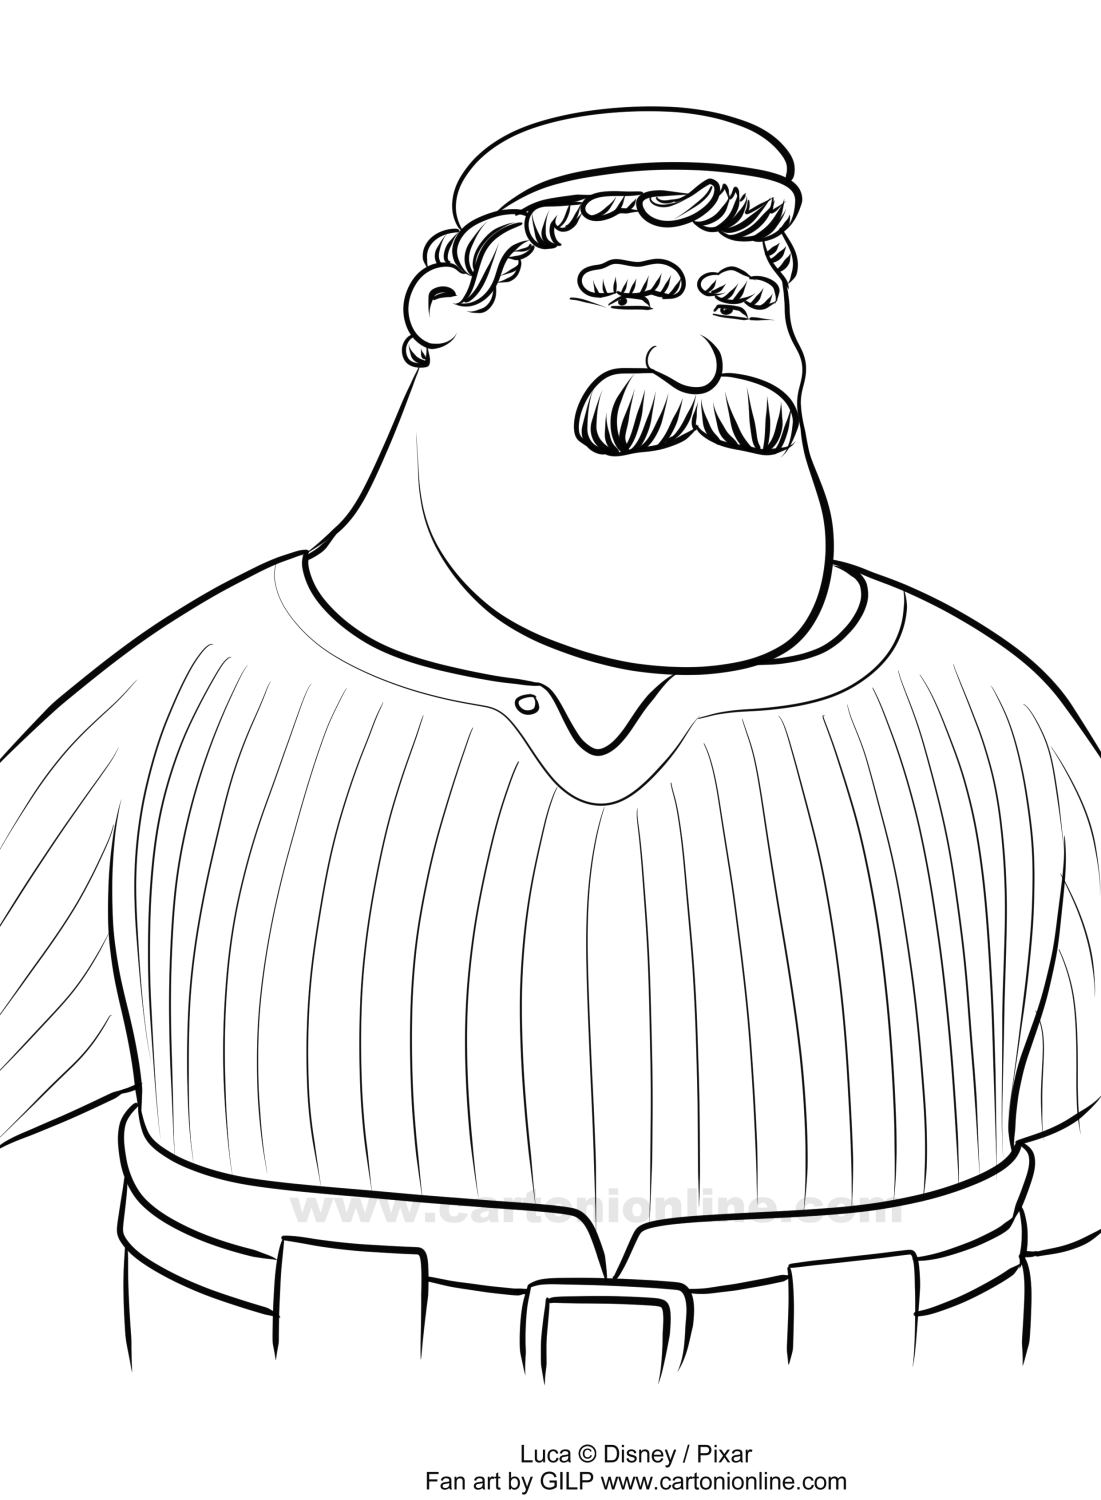 Massimo Marcovaldo von Luca (Disney/Pixar) coloring page to print and coloring